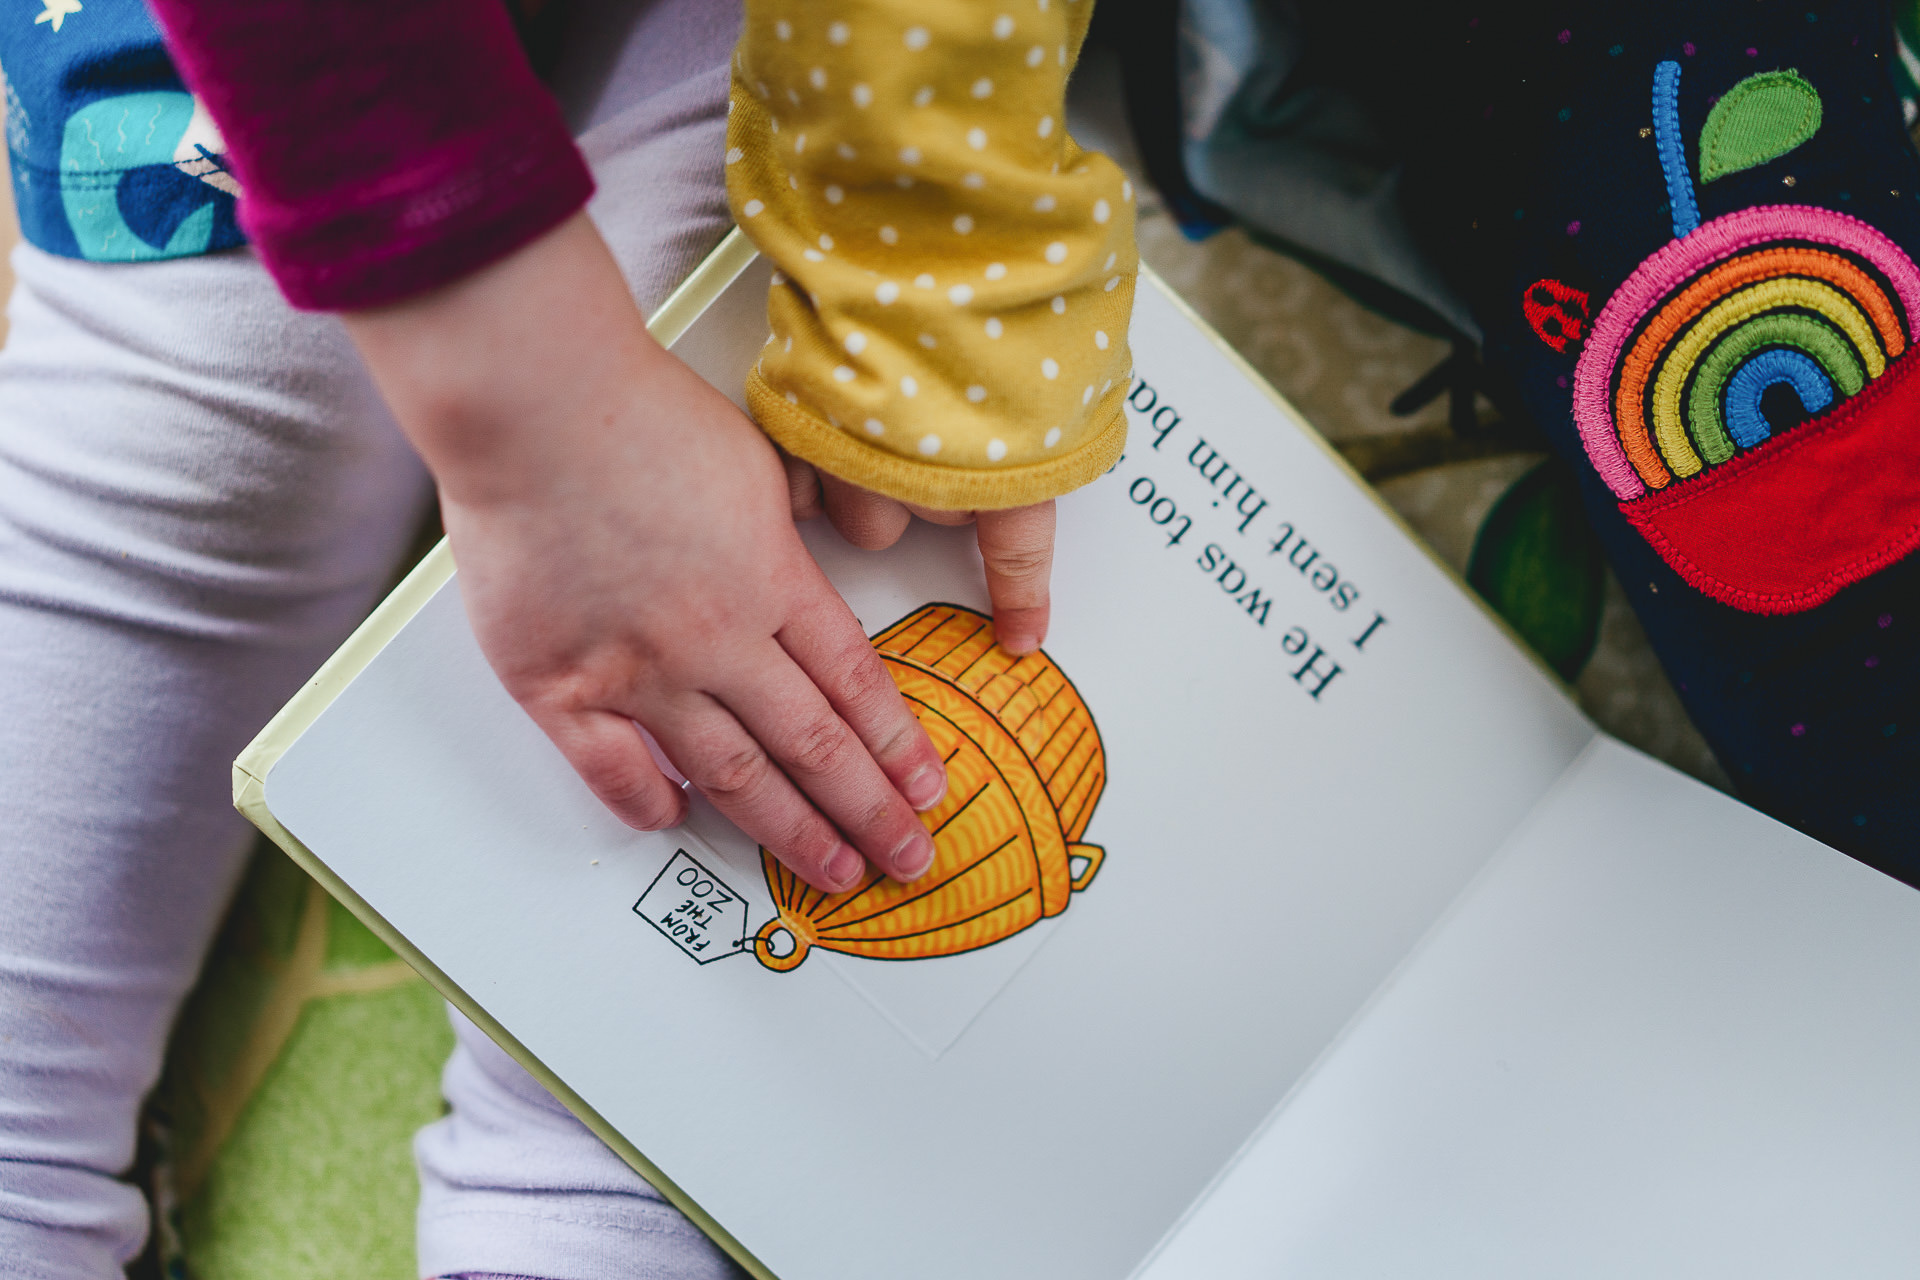 Two small children's hands pointing at a book